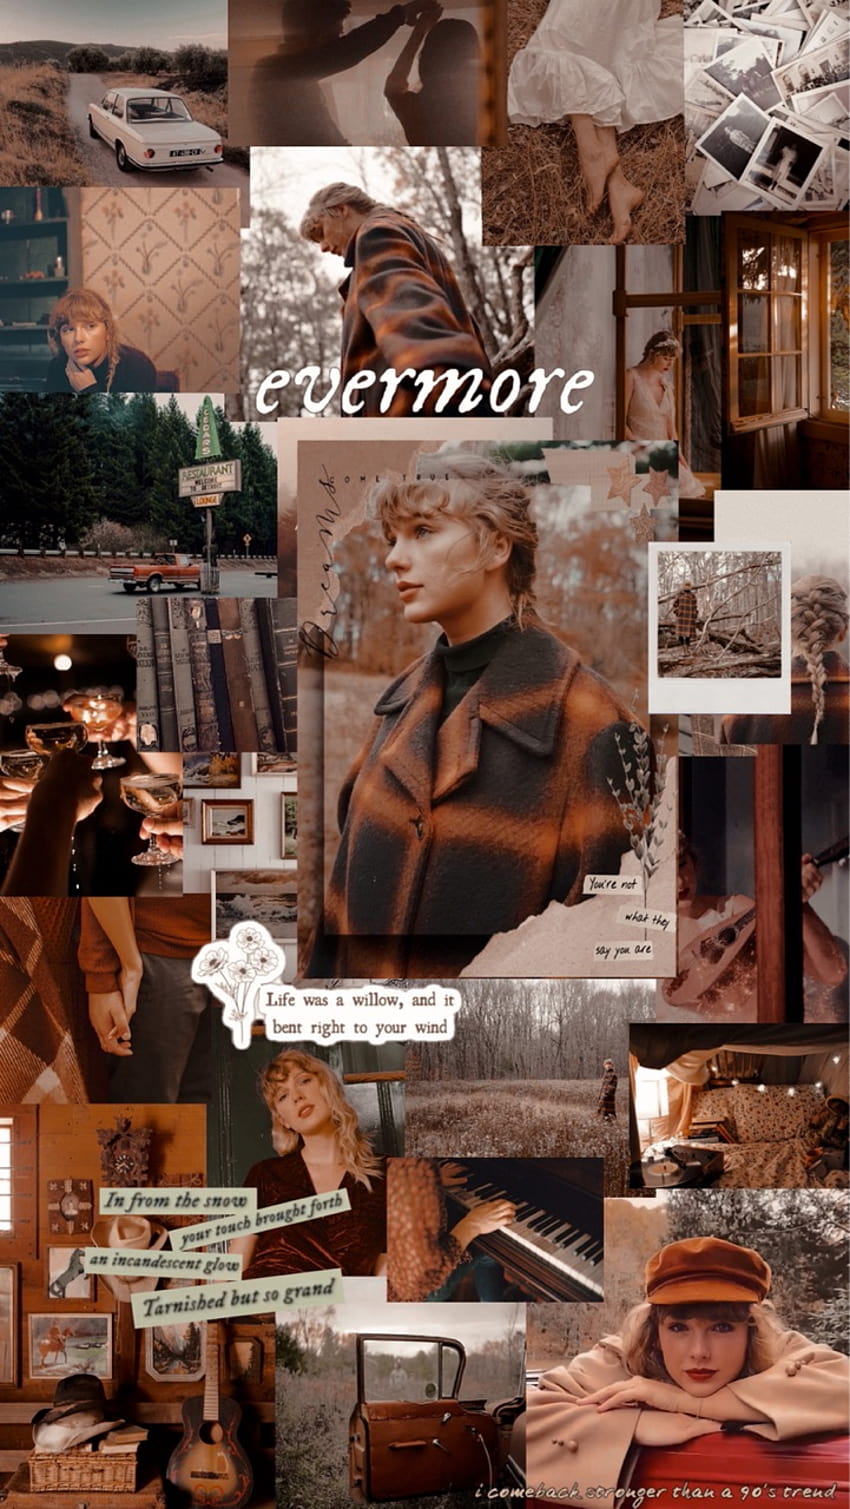 Taylor Swift Evermore Aesthetic Uploaded by ✮ b e c c a, taylor swift collage HD 전화 배경 화면